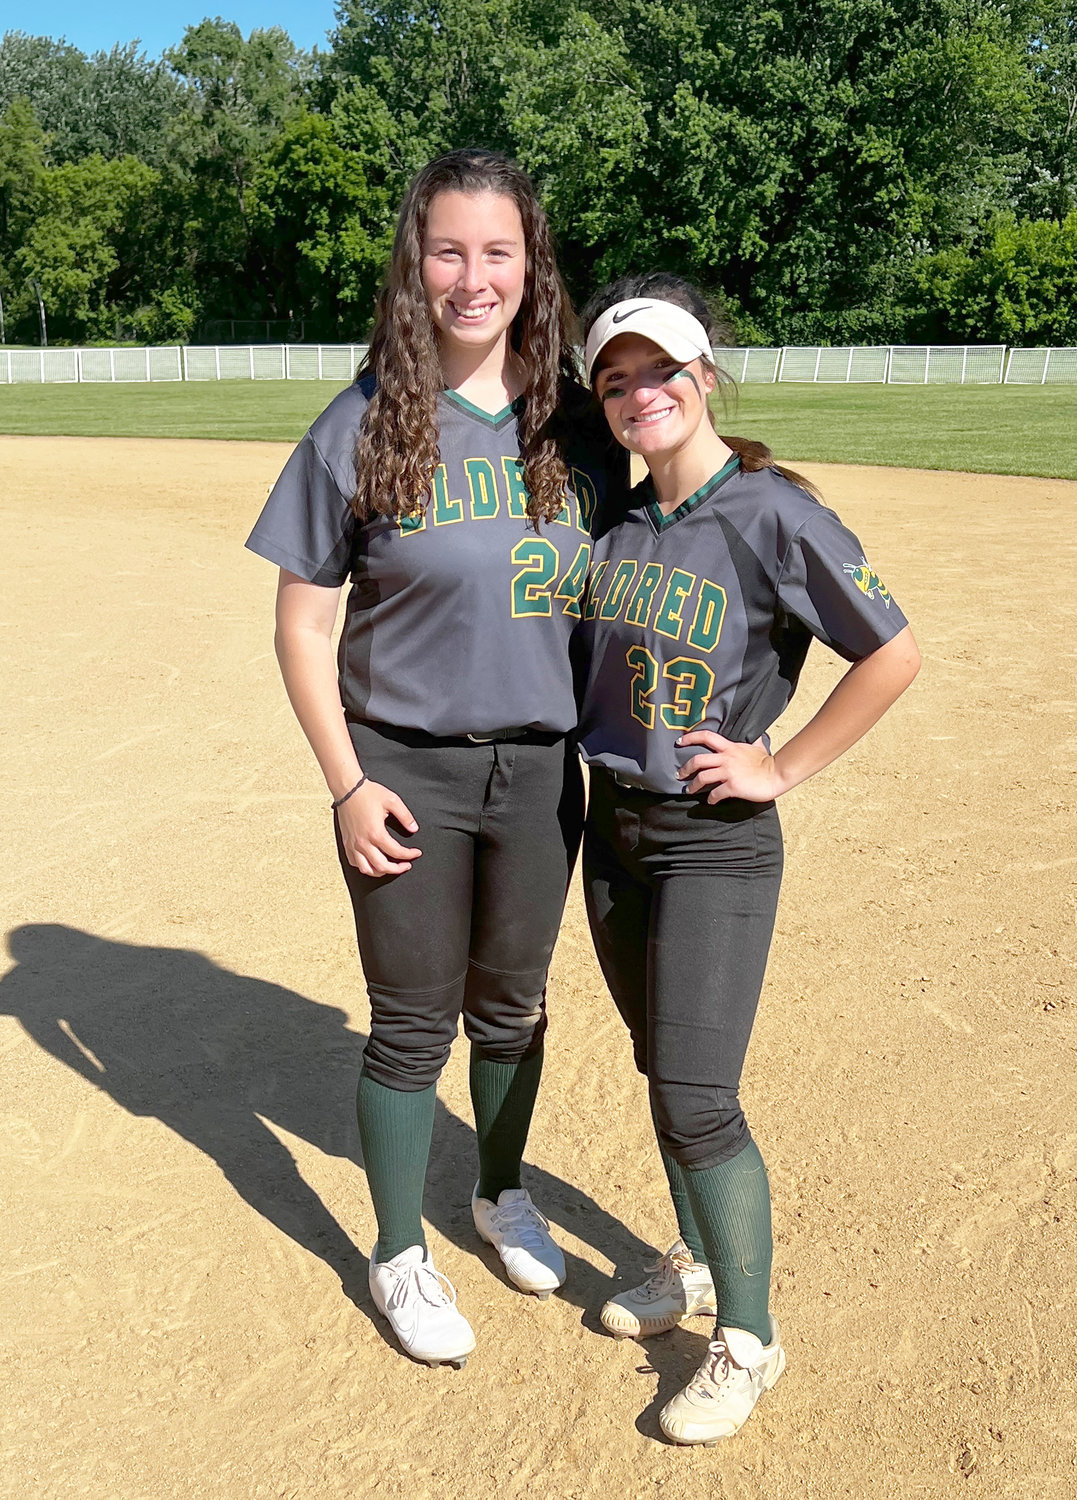 Eldred’s inimitable duo, Lily Gonzalez, left and Dana Donnelly still have those captivating smiles and their unshakeable love of the game even after their regional defeat to Deposit/Hancock. Their softball life continues this summer with Pro Prospects U18 Phantoms, yet another winning enterprise strongly benefiting from these two winning players.